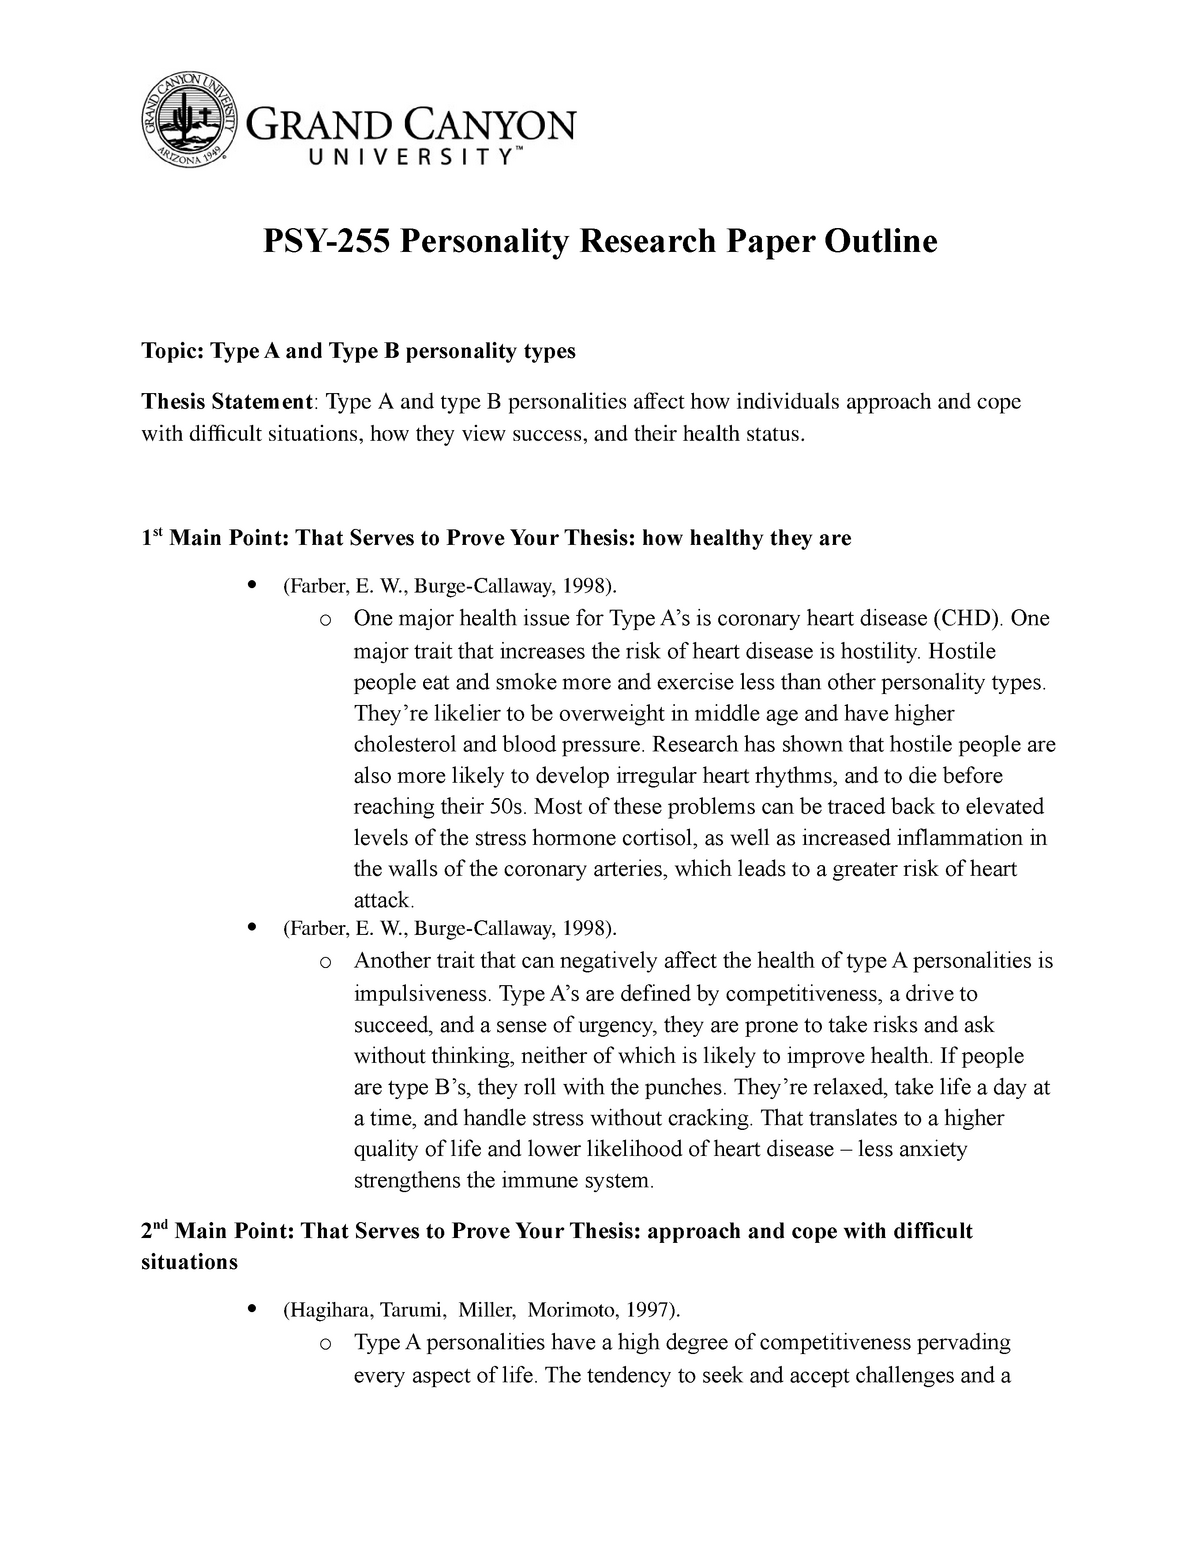 research paper about personality